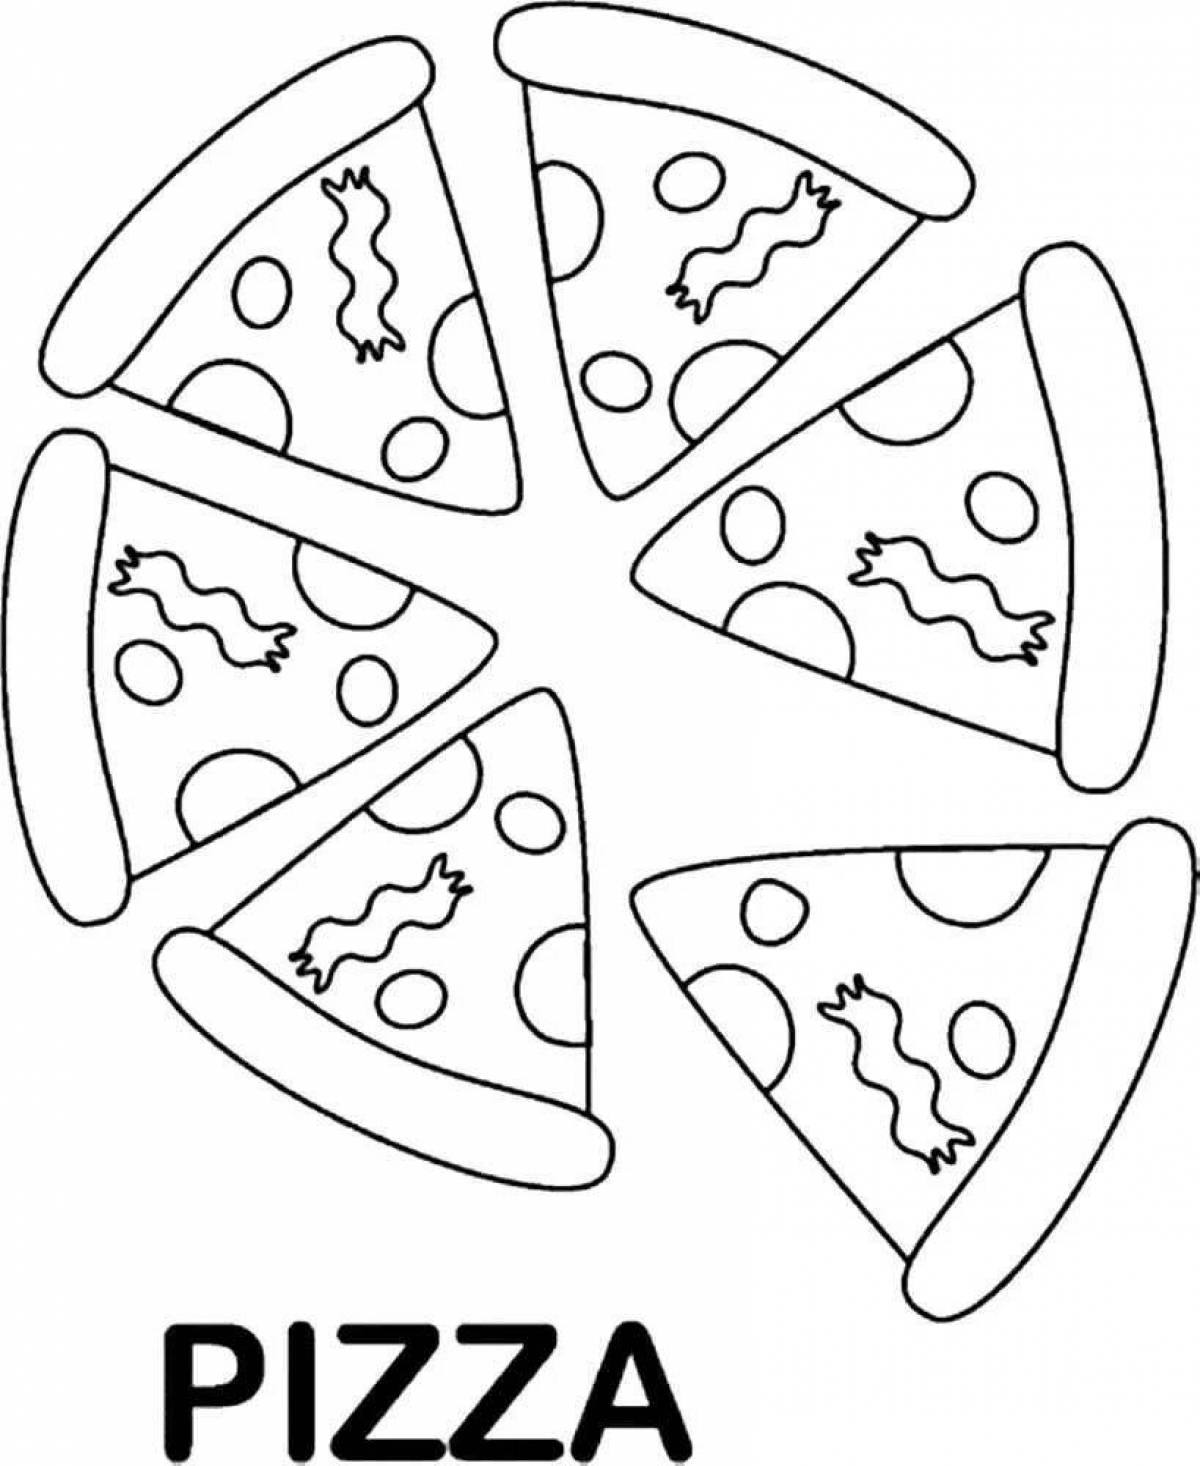 Drawing of delicious pizza